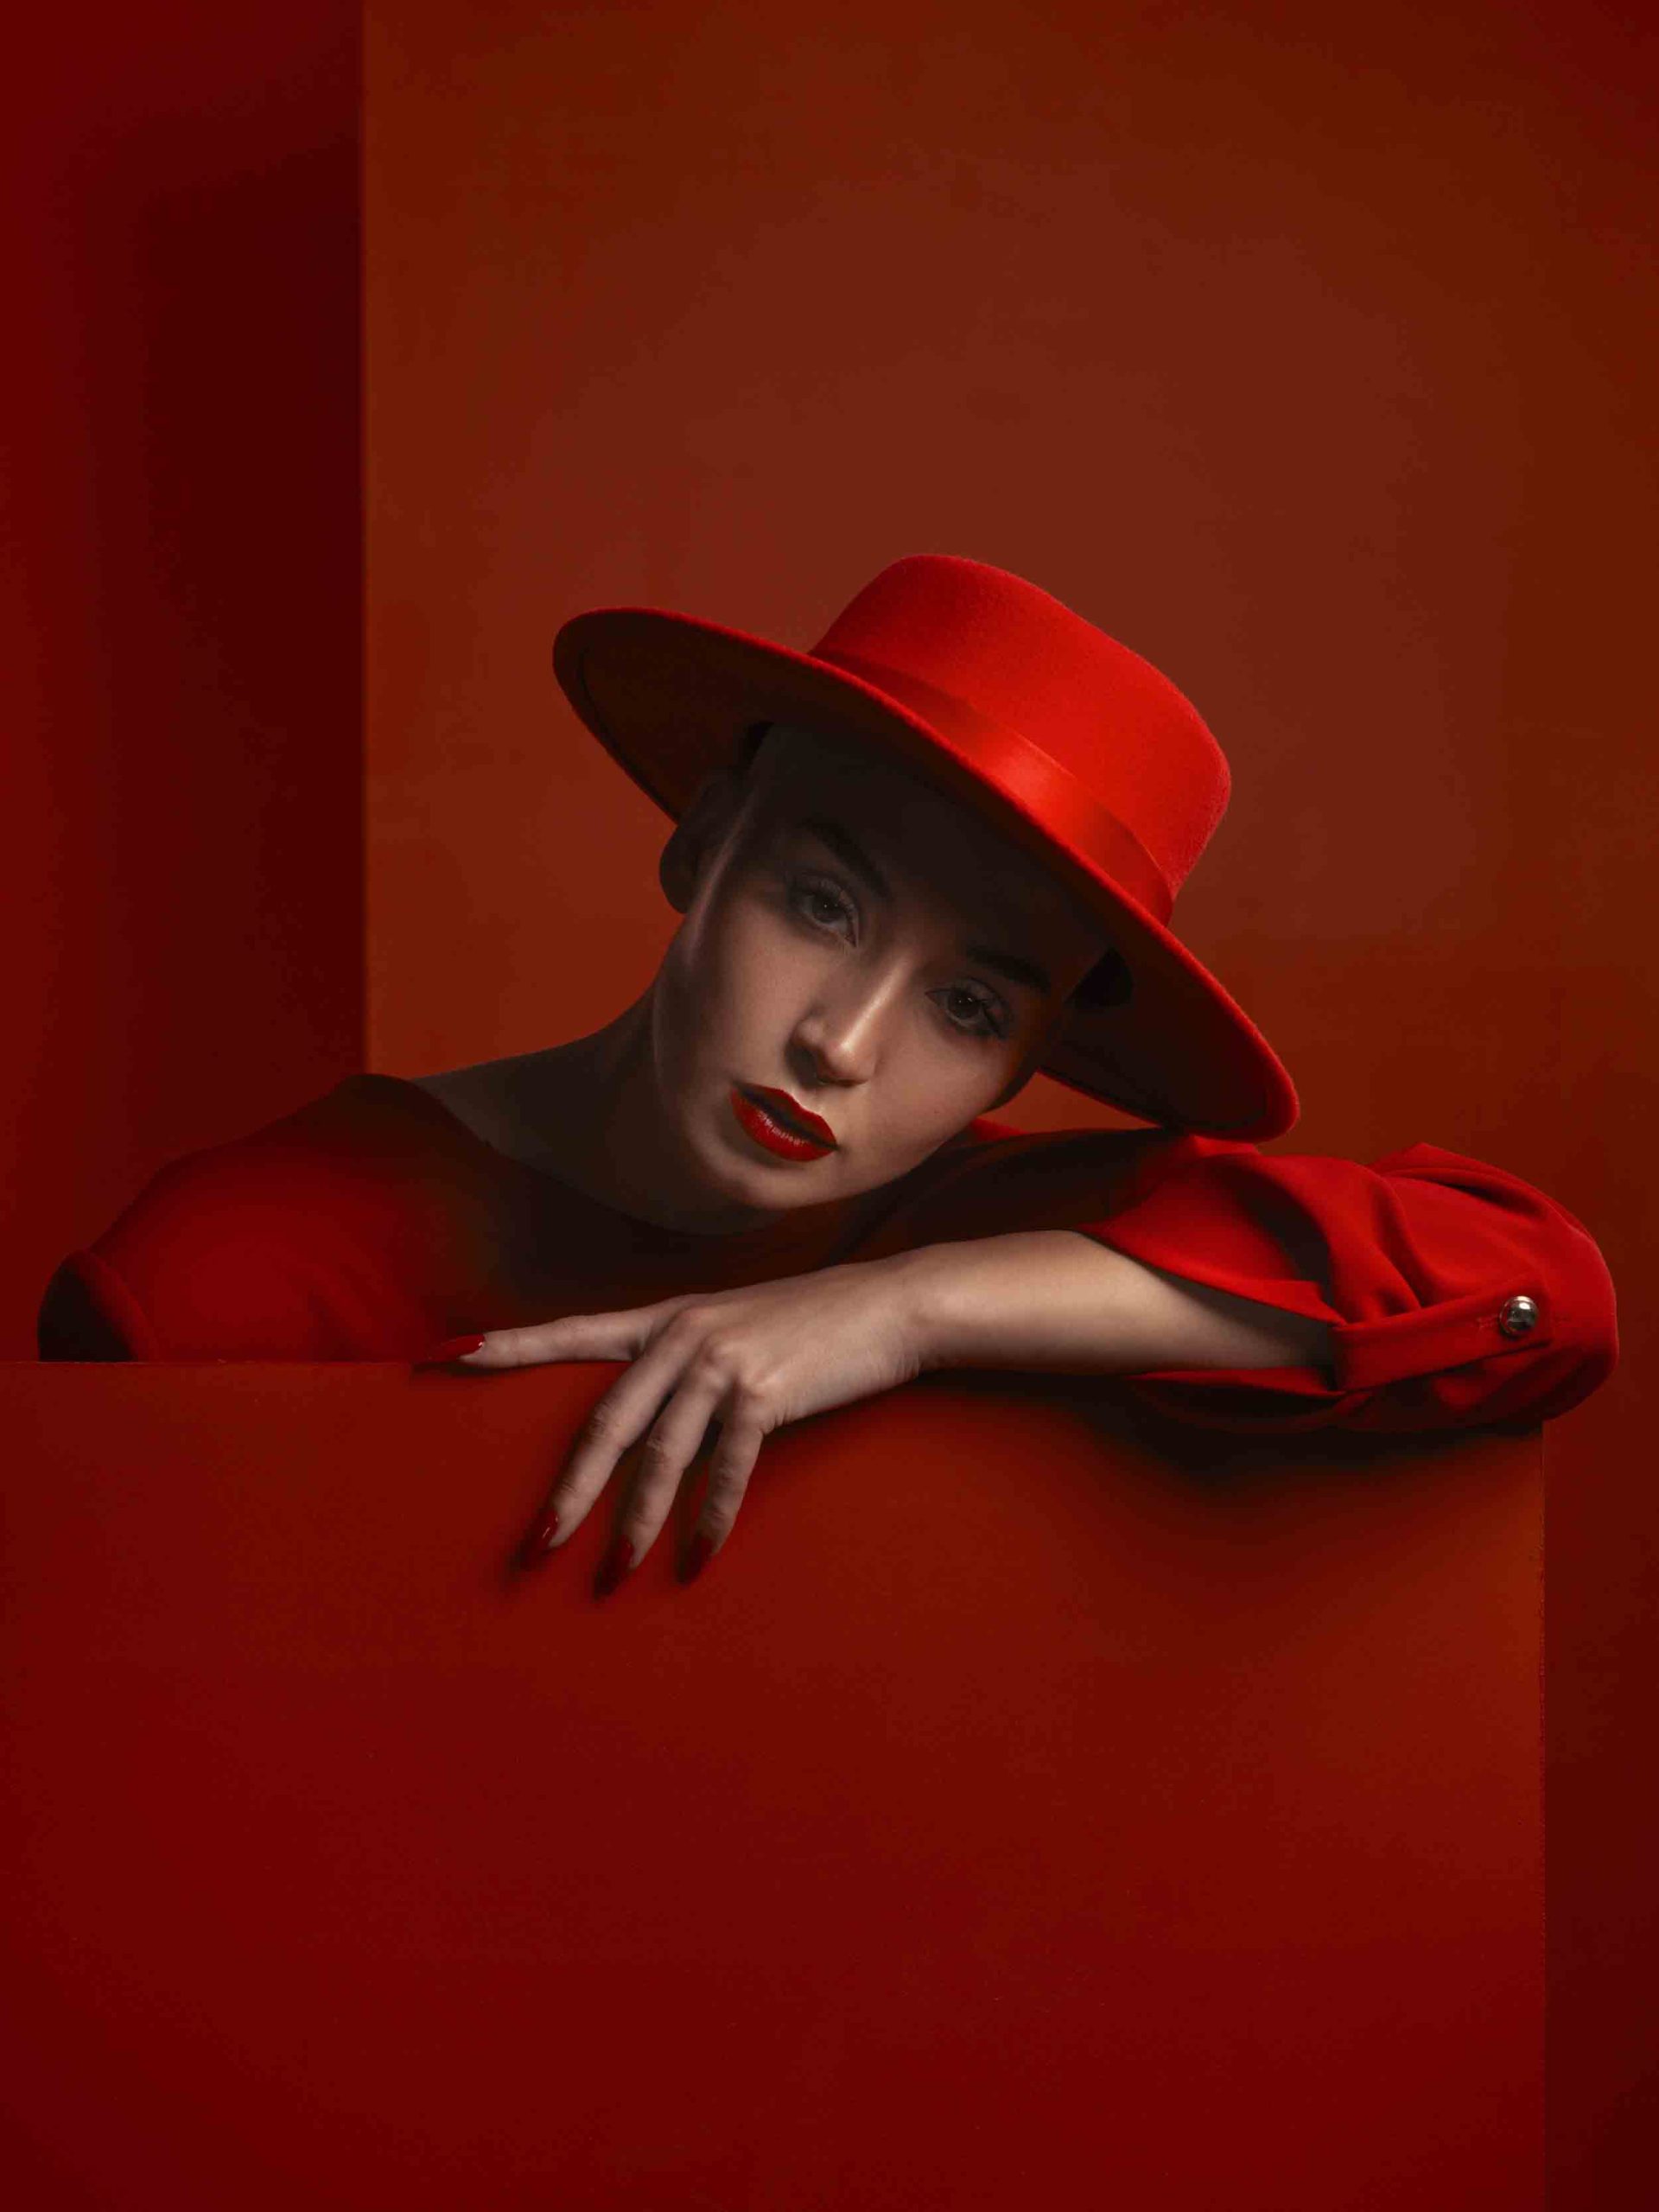 Fashion, portrait and a vintage woman on a red background for a